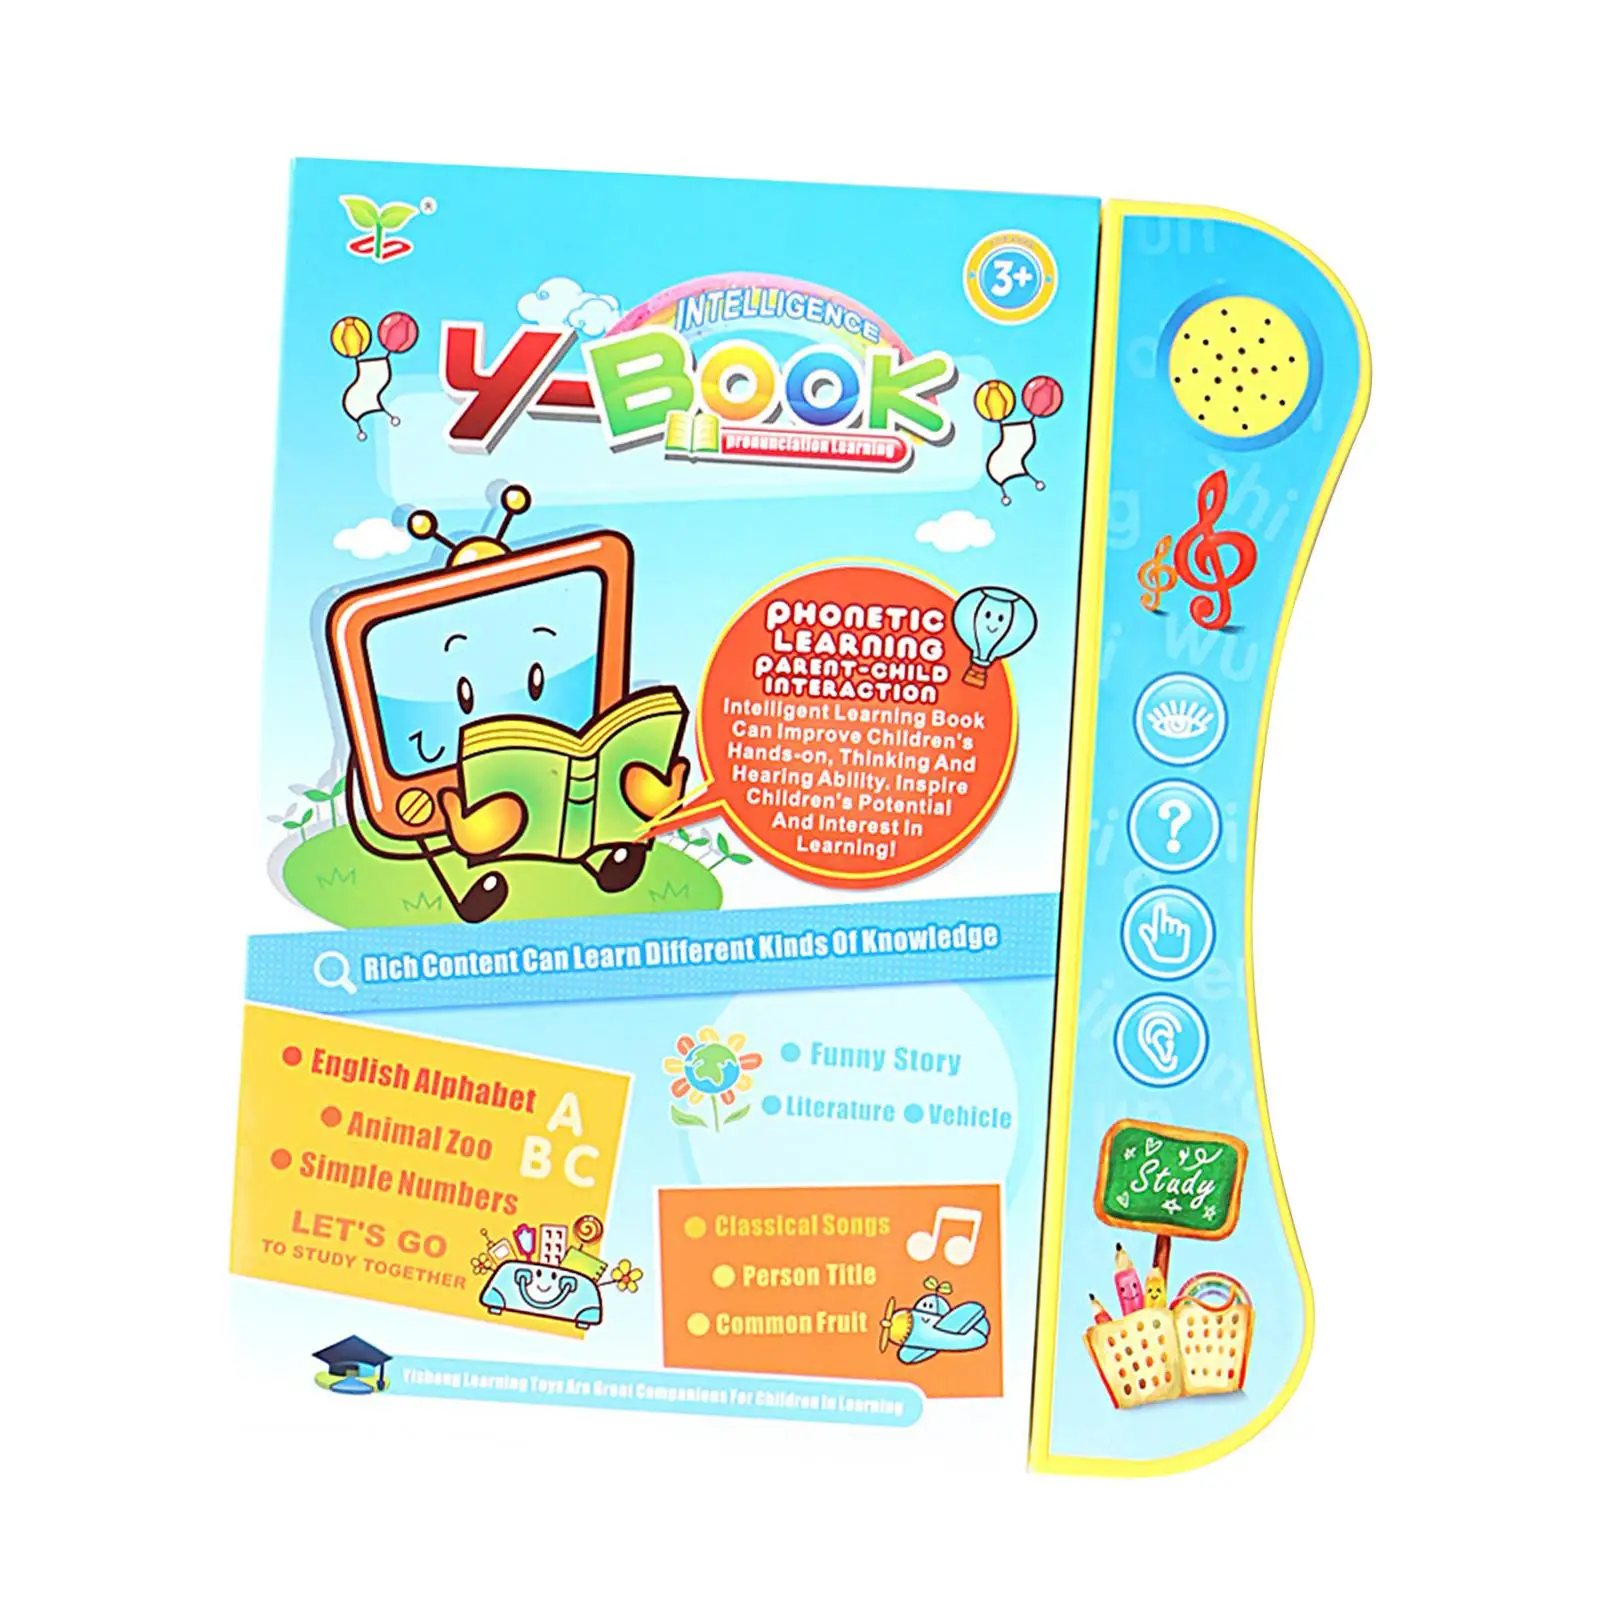 Learn english, Interactive Children sound book, Multipurpose Alphabet Learning English, interactive for Character Appellation